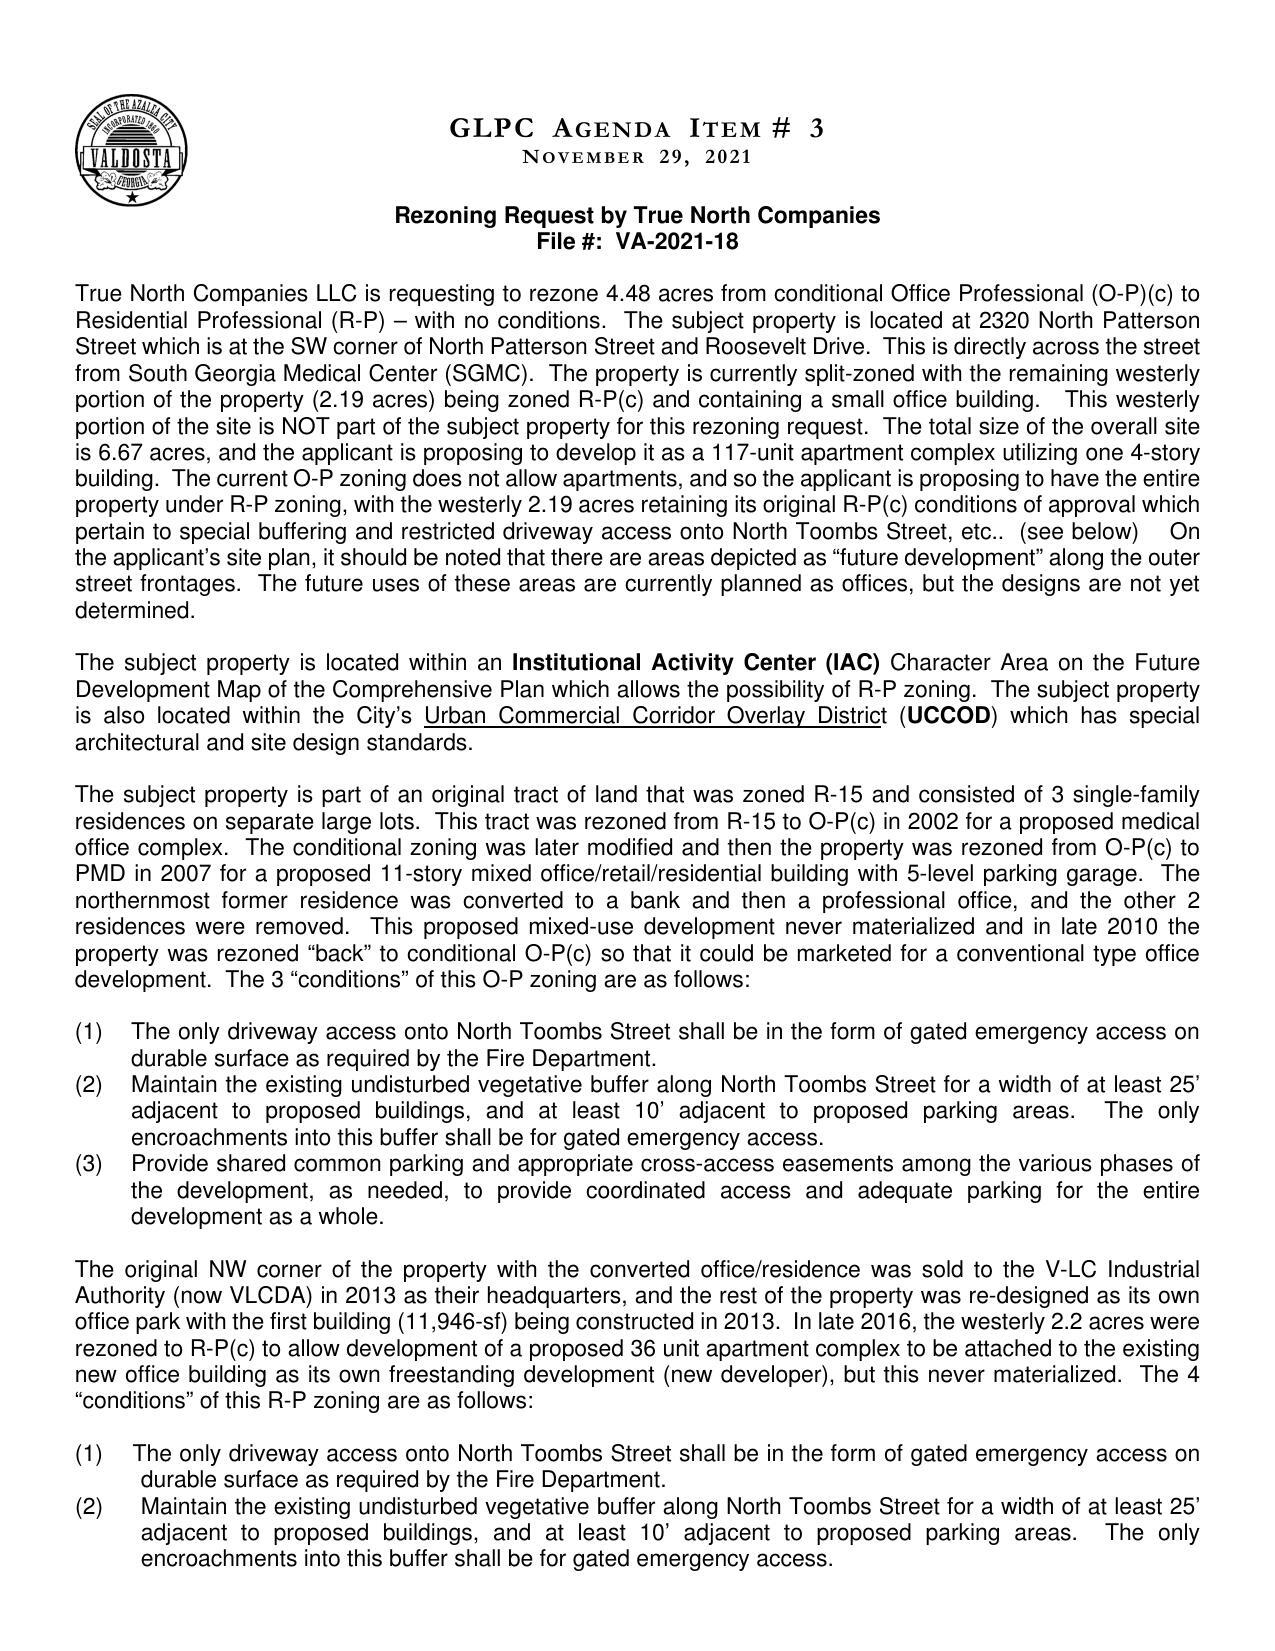 True North Companies LLC is requesting to rezone 4.48 acres from conditional Office Professional (O-P)(c) to Residential Professional (R-P) – with no conditions.